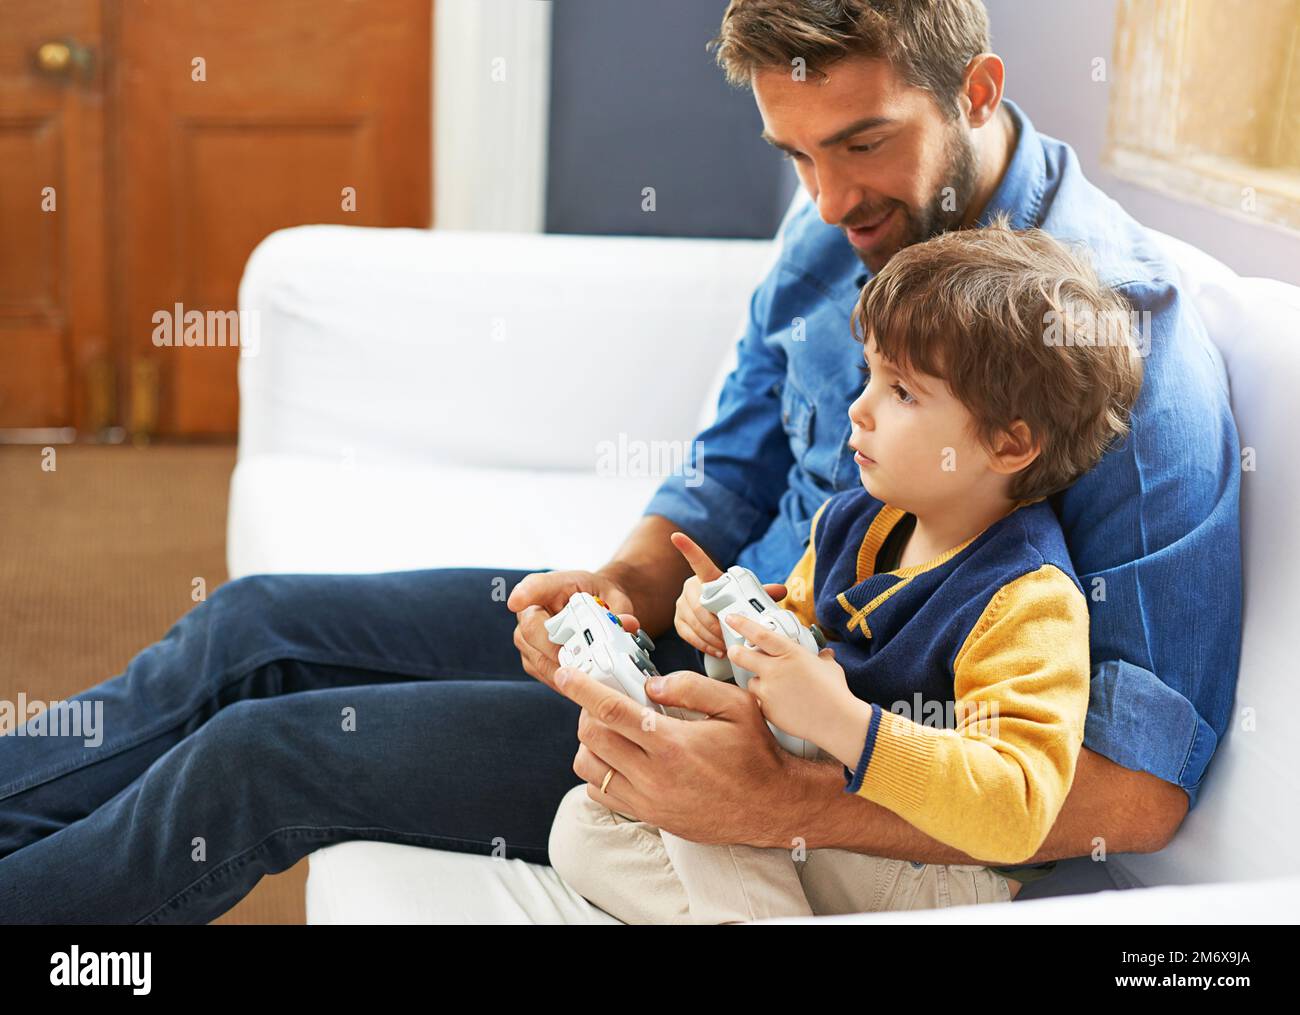 Youre really good at this. a father and his young son playing video games. Stock Photo